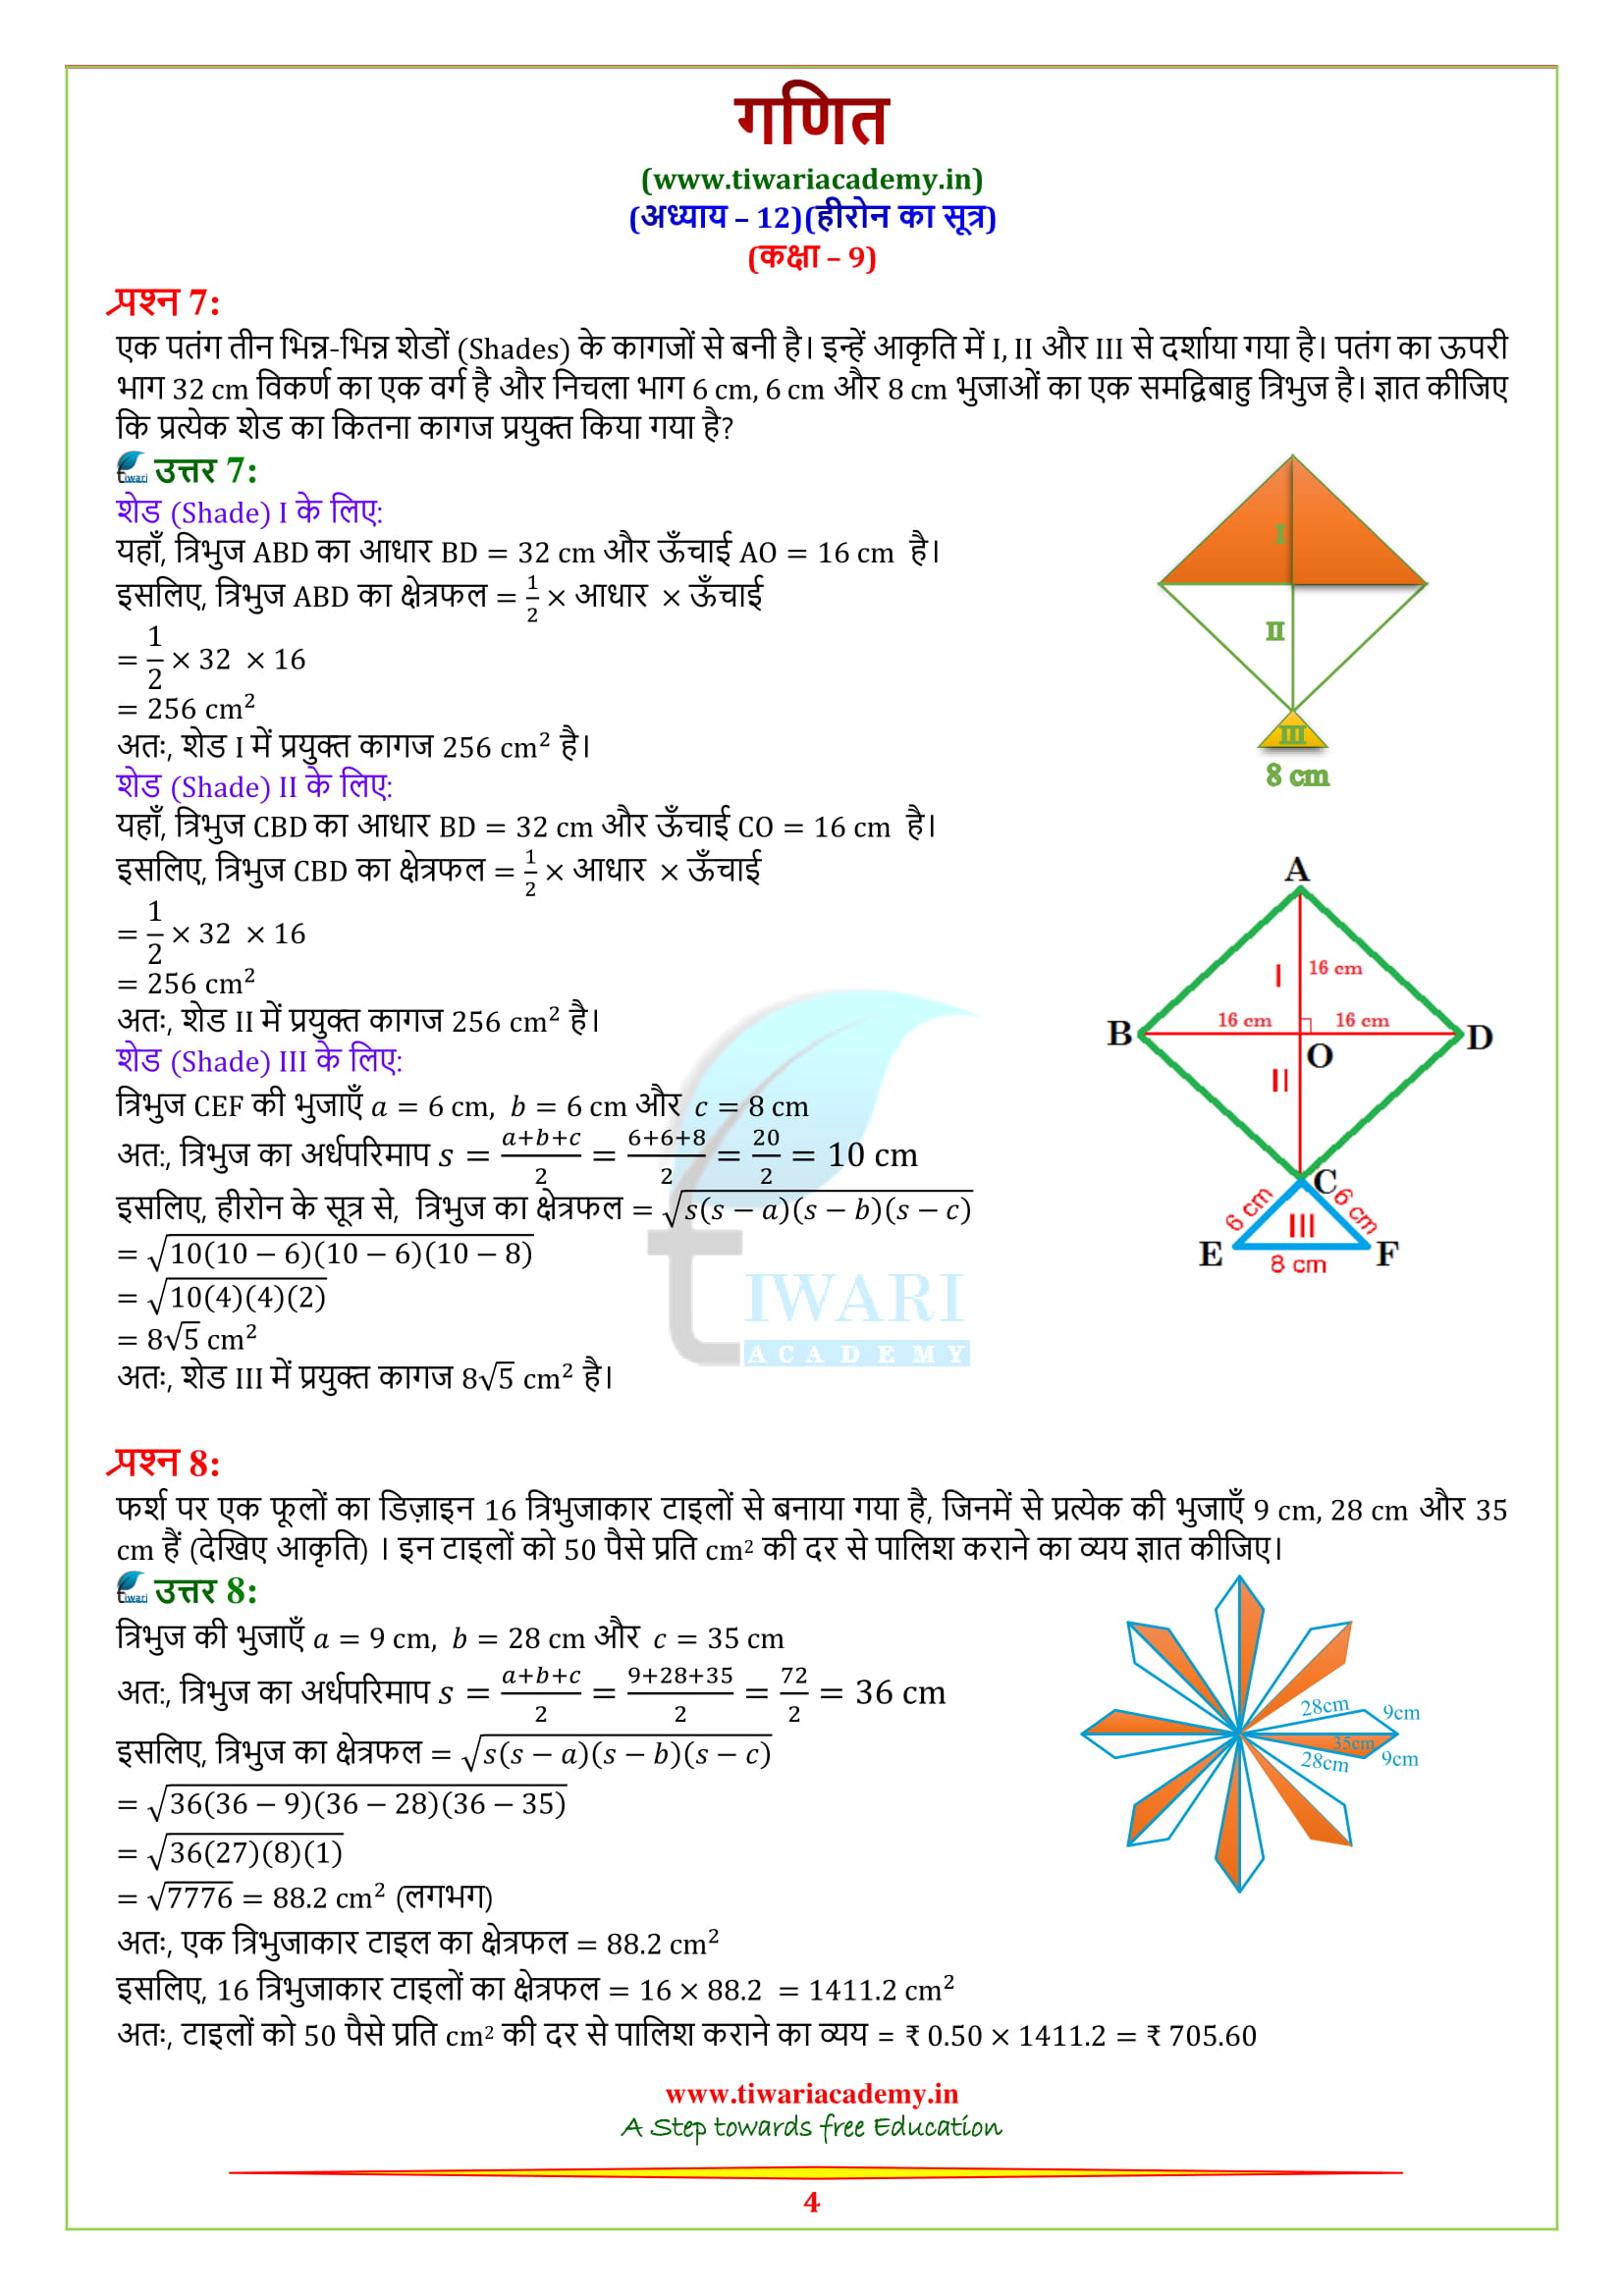 NCERT Solutions for class 9 Maths Exercise 12.2 free to download in pdf